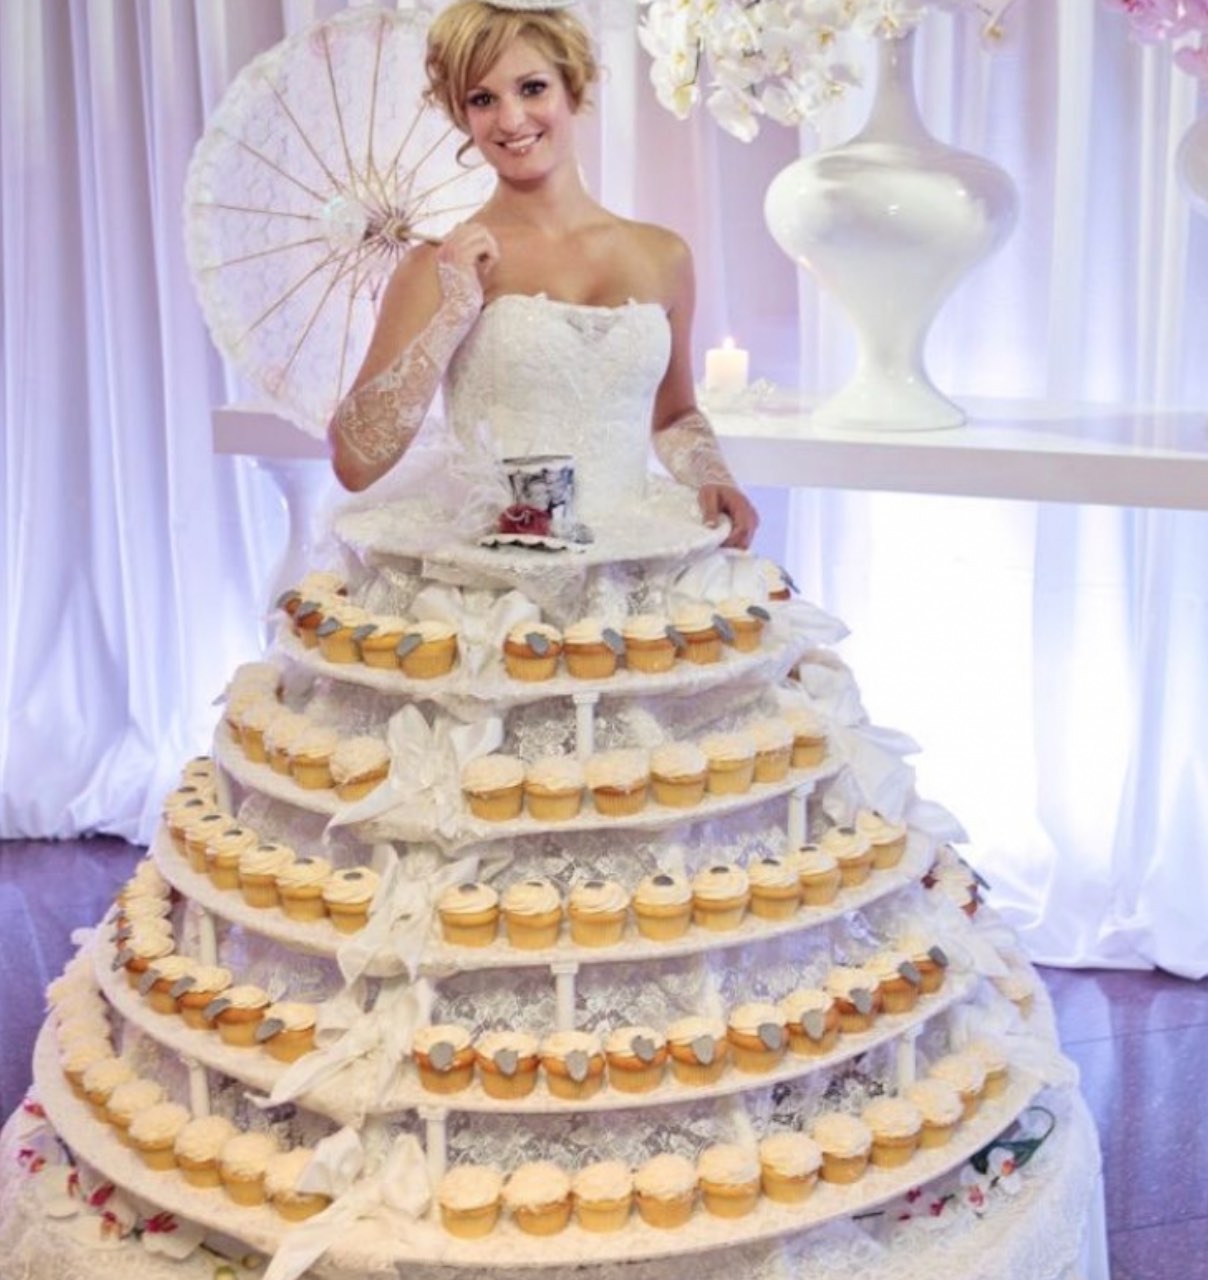 27 Wedding Dresses That Shocked Their Guests Page 10 of